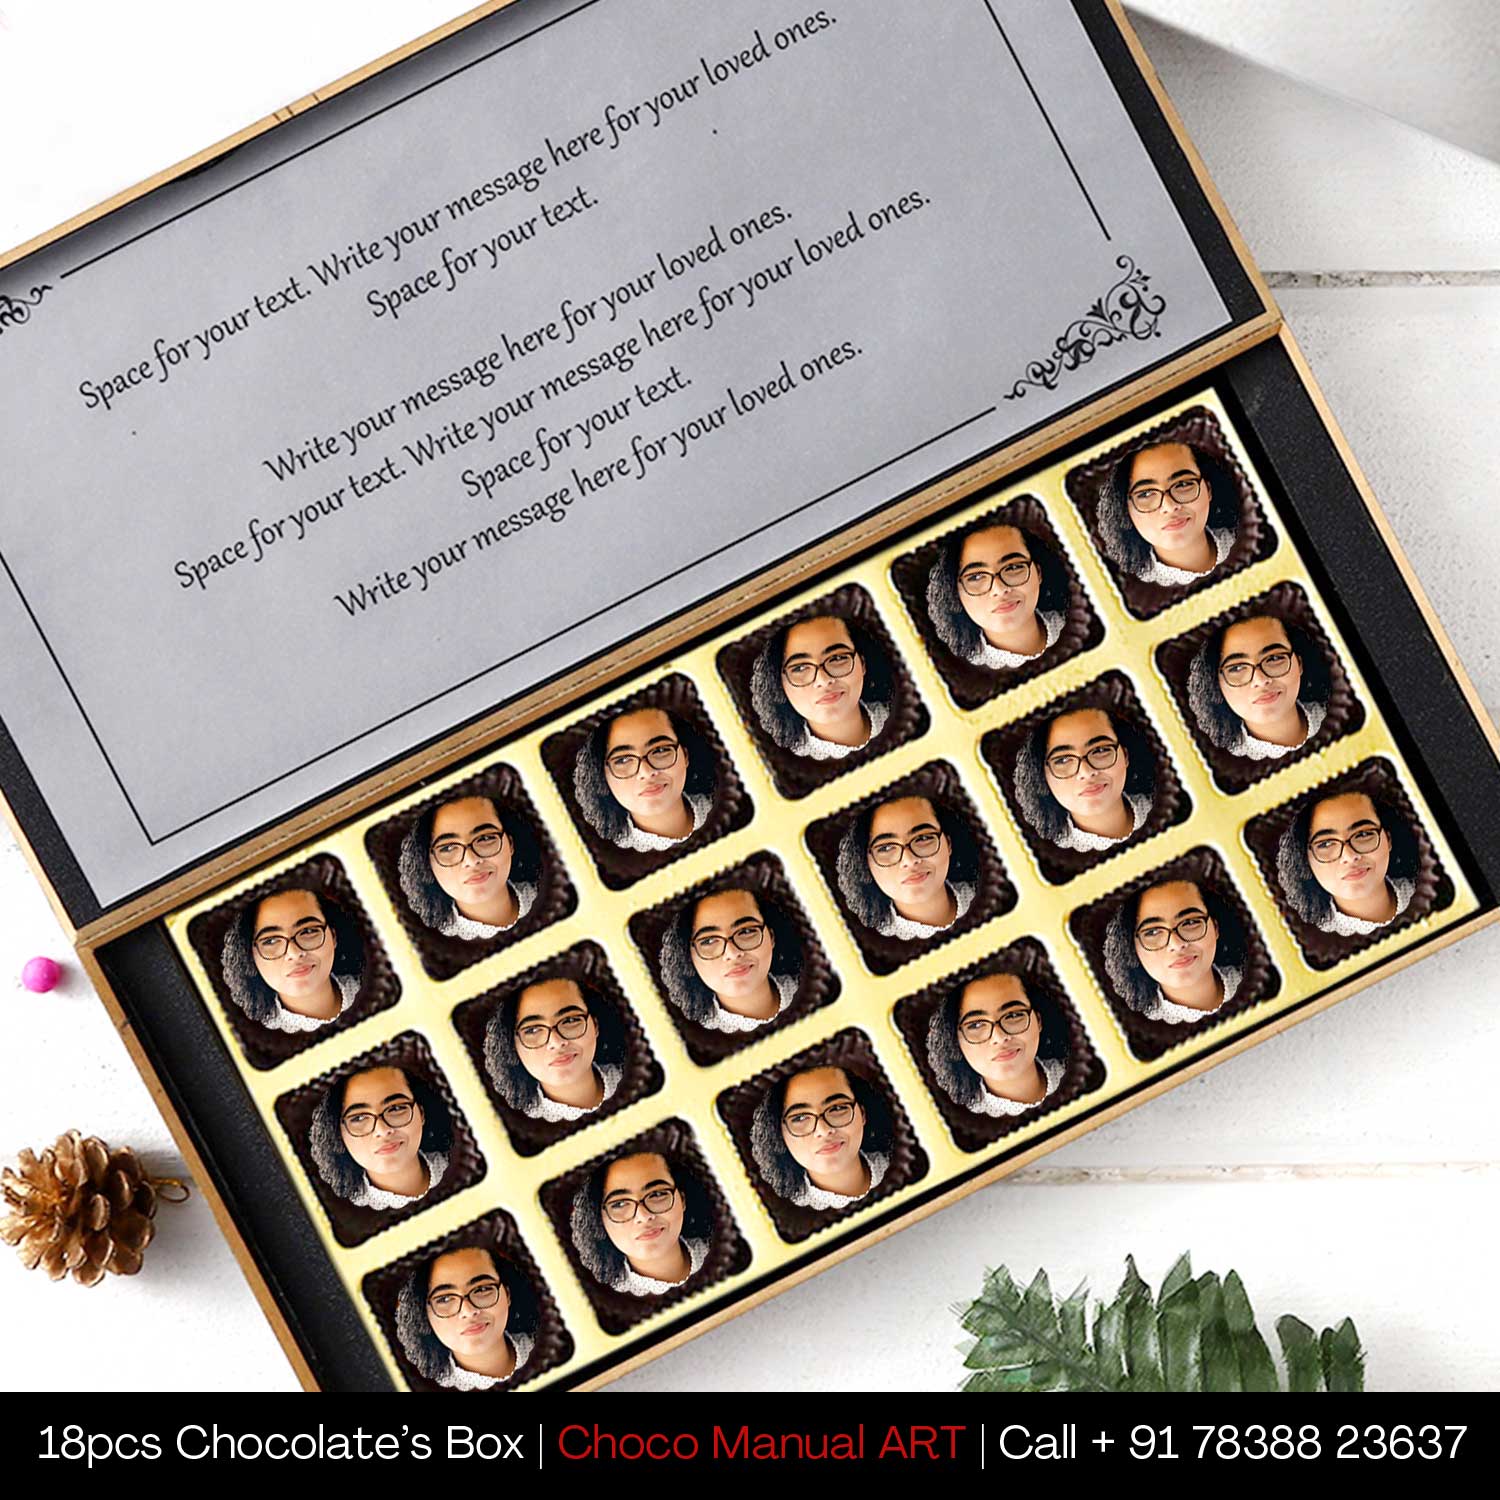  personalised chocolates with names personalised chocolate box personalised chocolates for birthdays customized chocolate box india personalised chocolate hamper customized chocolate wrappers chocolate with photo printed on it customised chocolates near me